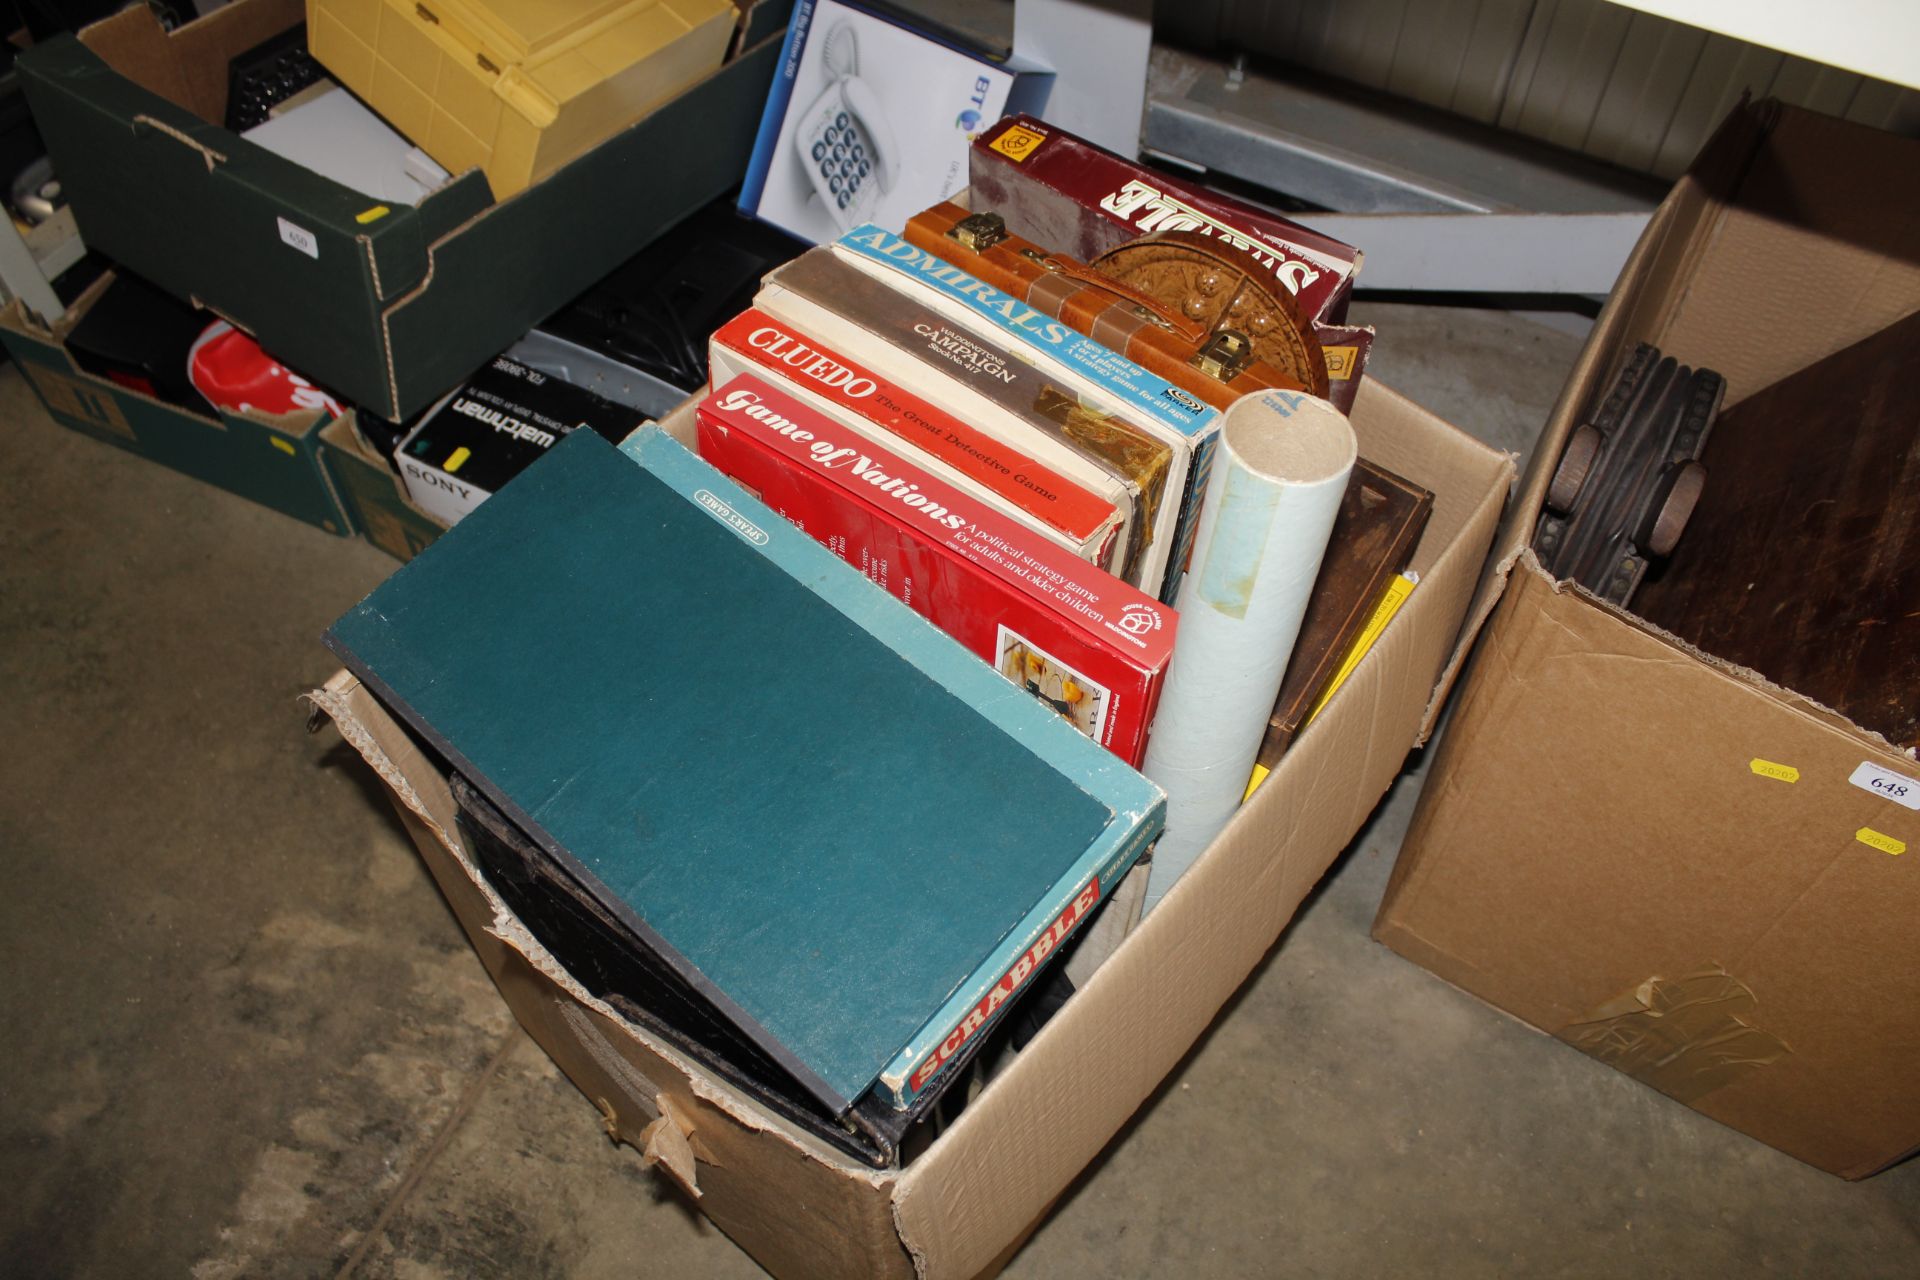 A box containing various board games